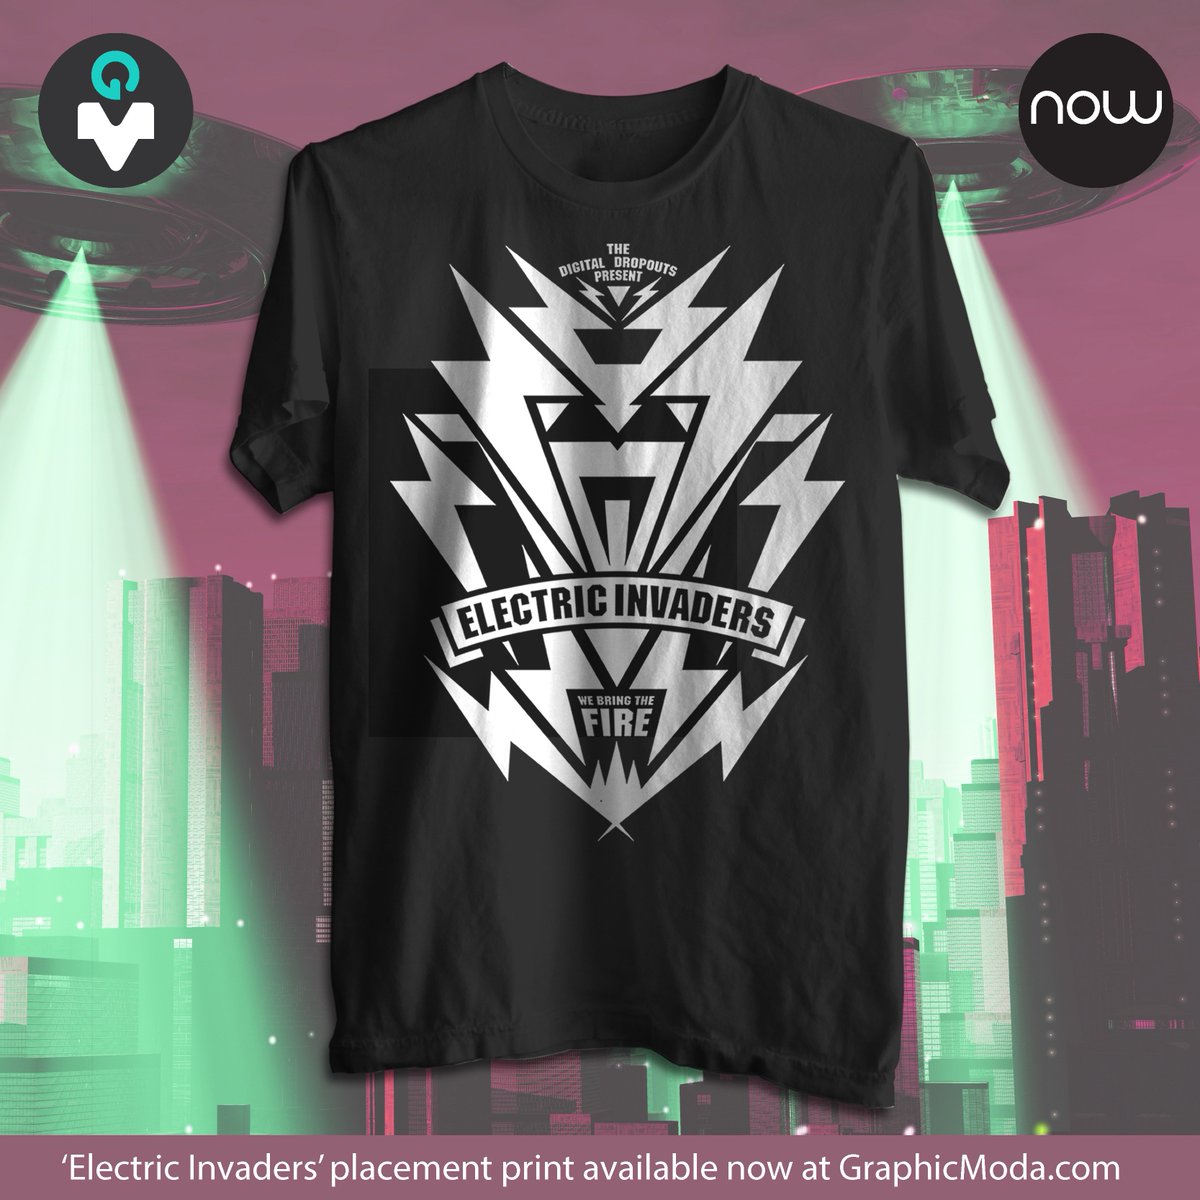 They're here...!

The Digital Dropouts Present:
ELECTRIC INVADERS

Available to BUY NOW at graphicmoda.com/designs/electr…

#fashionprintpassion #tshirtgraphic #teeshirtdesigner #rocktshirt #DJtshirt #graphicdesign #scifi #fashionprint #menswearclothing #menswear #lightningbolt